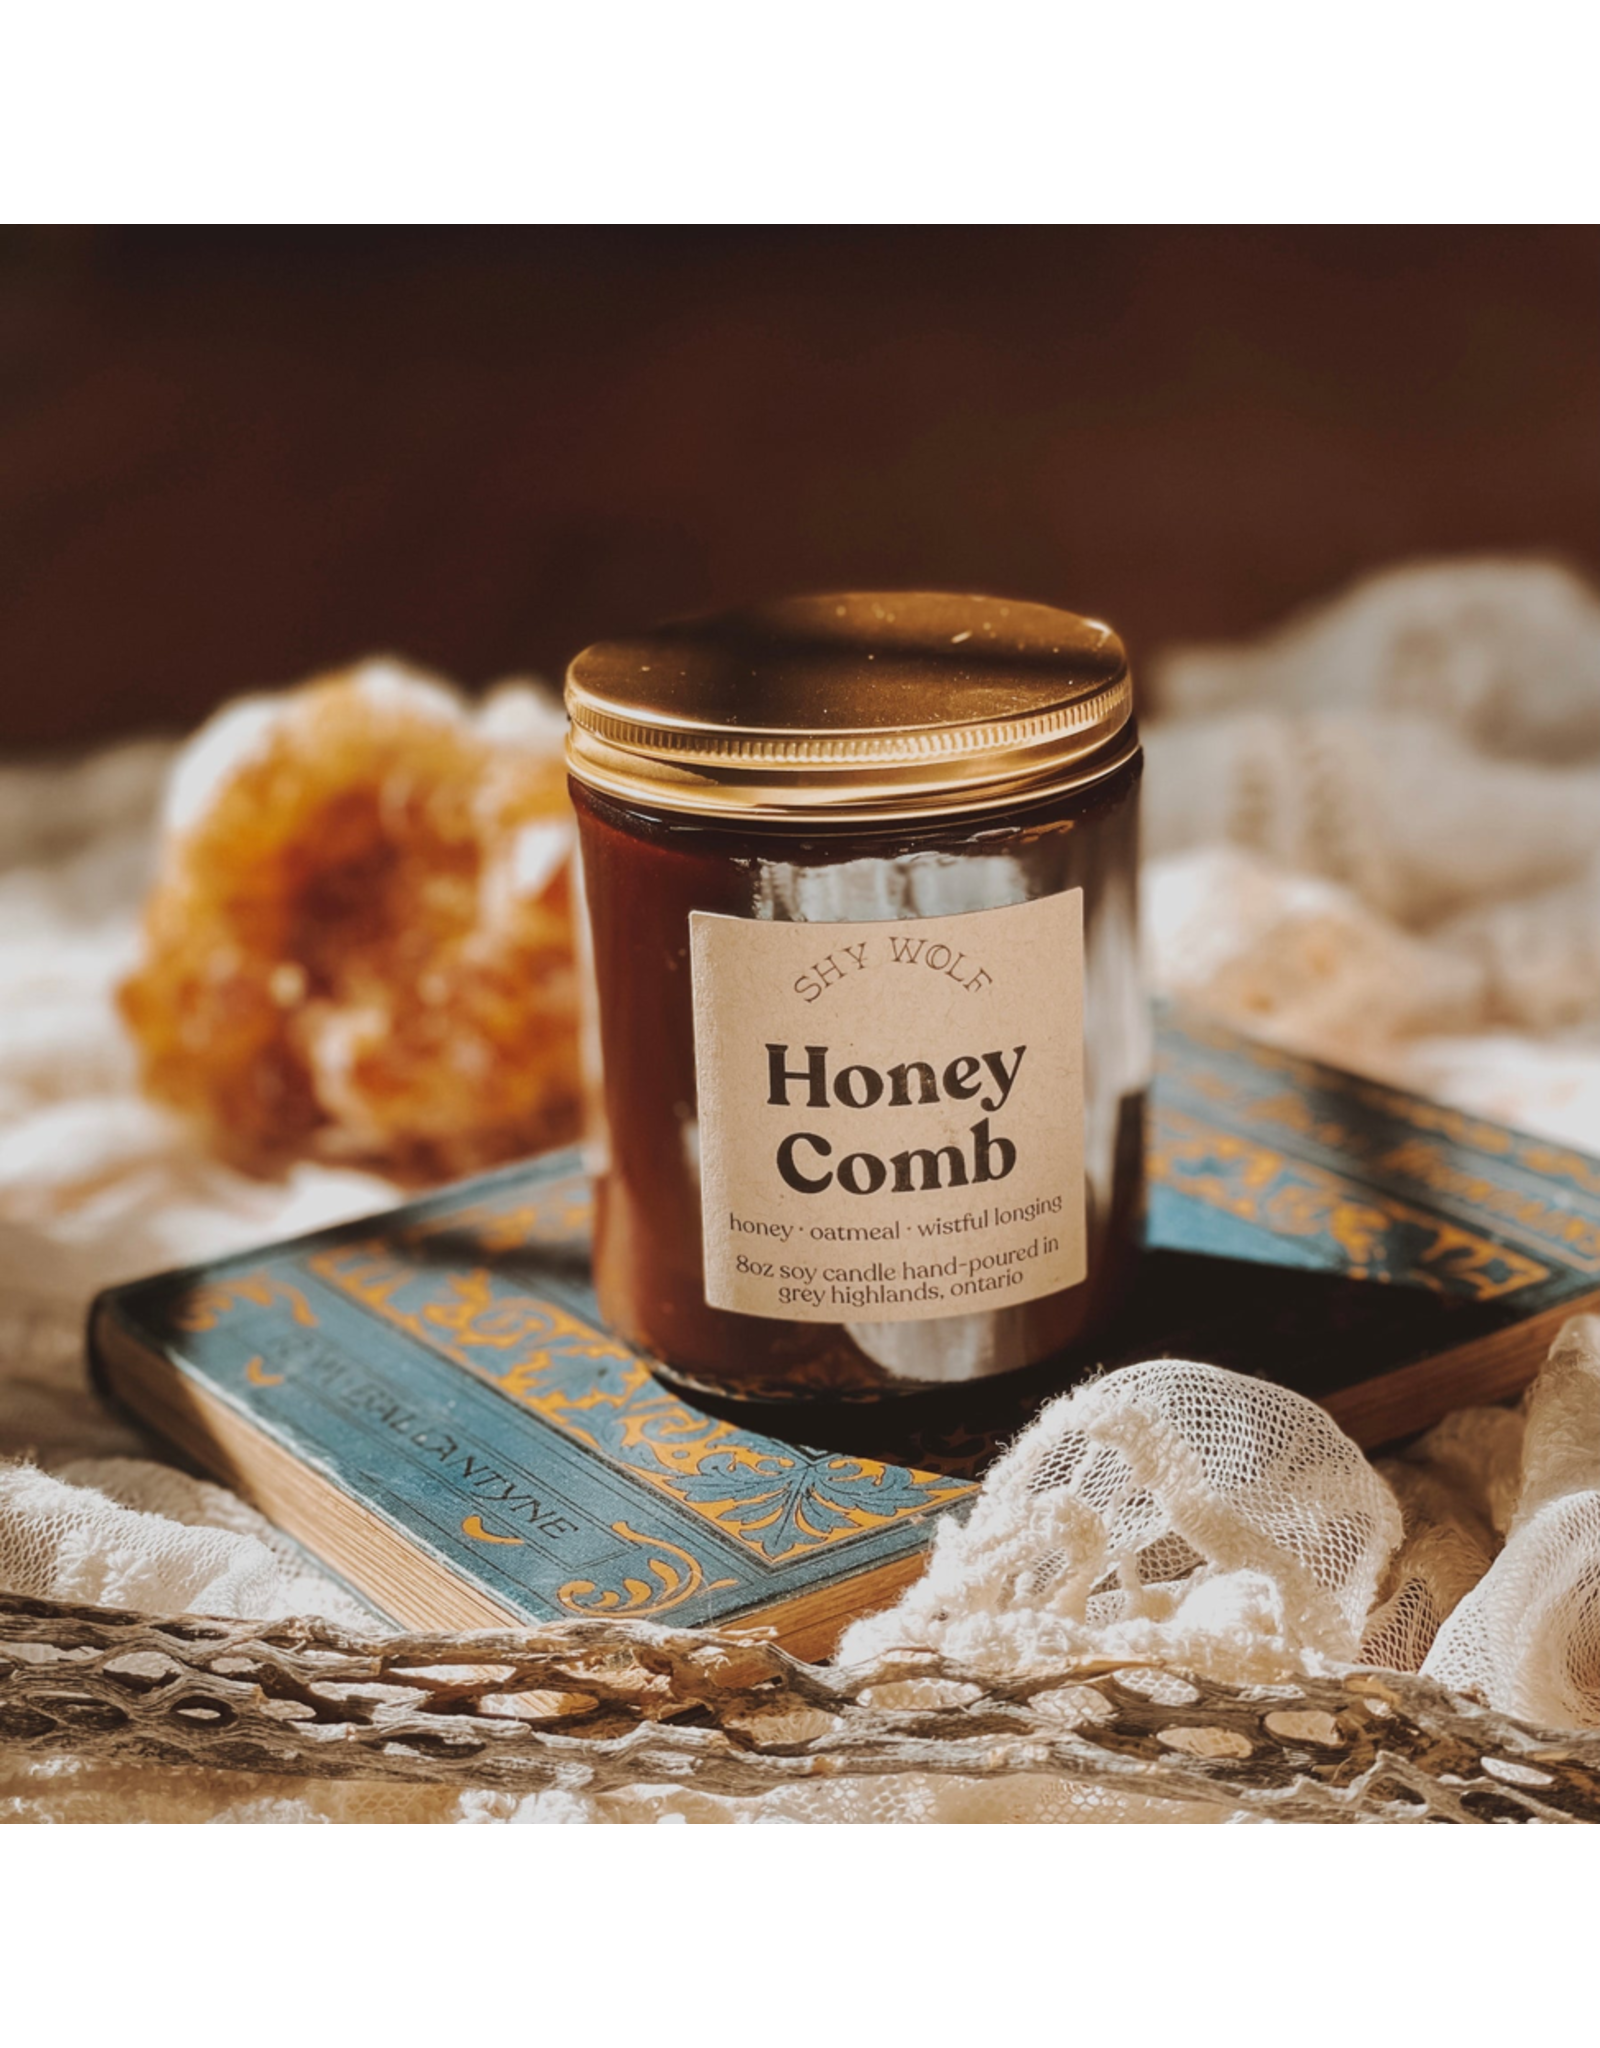 Shy Wolf - Soy Candle / Honey Comb, Daisy Jones Collection, 8oz